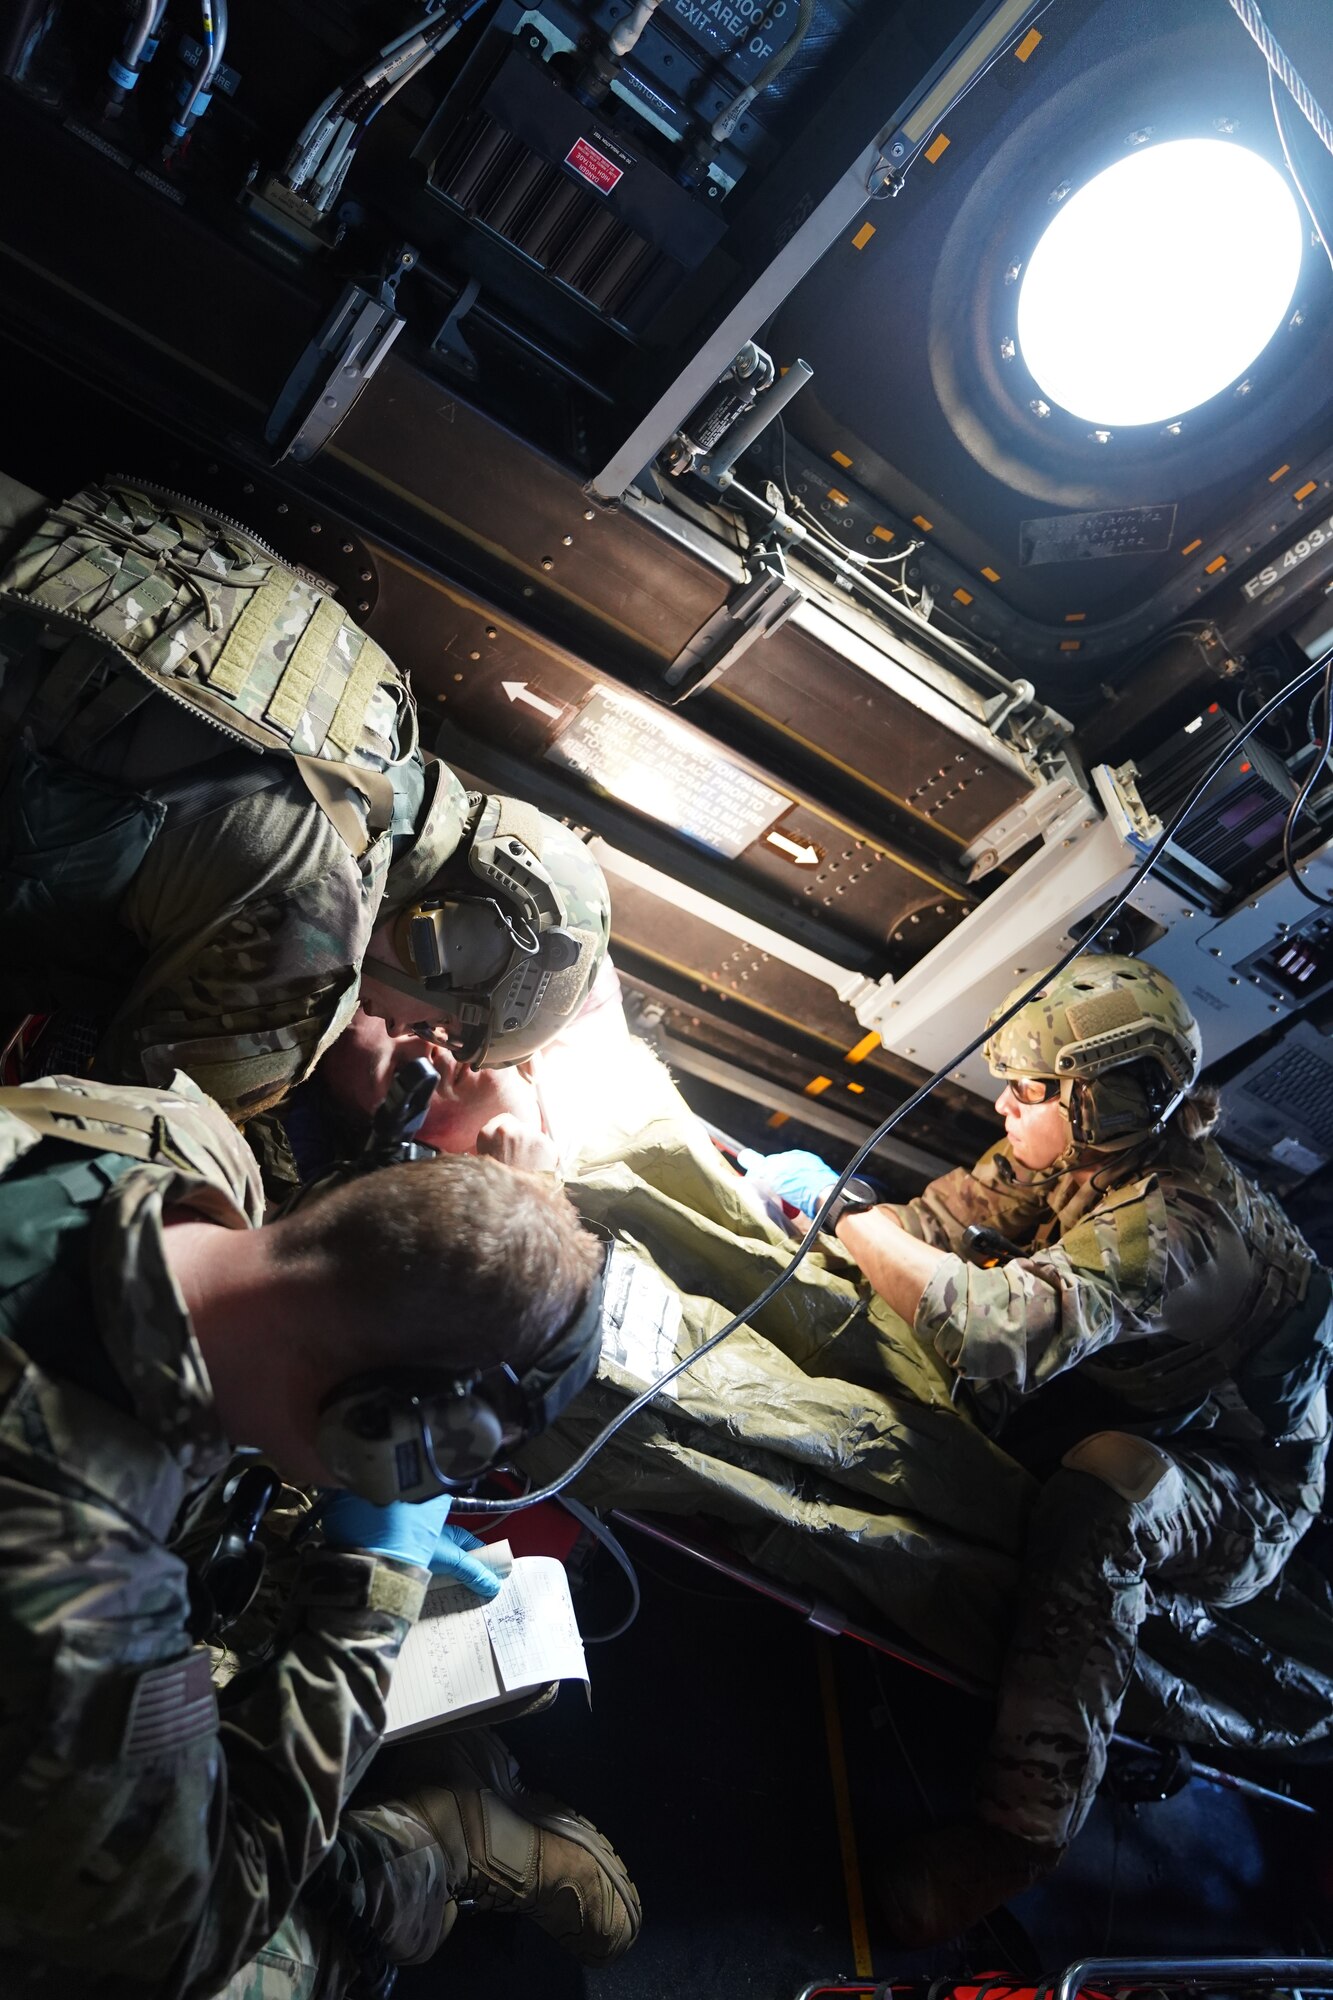 Special Operations Forces Medical Element members with the 353rd Special Operations Support Squadron conduct triage and emergency care of a recovered casualty role-player during an open water search and rescue training off the coast of Okinawa, Japan, Nov. 19, 2020.